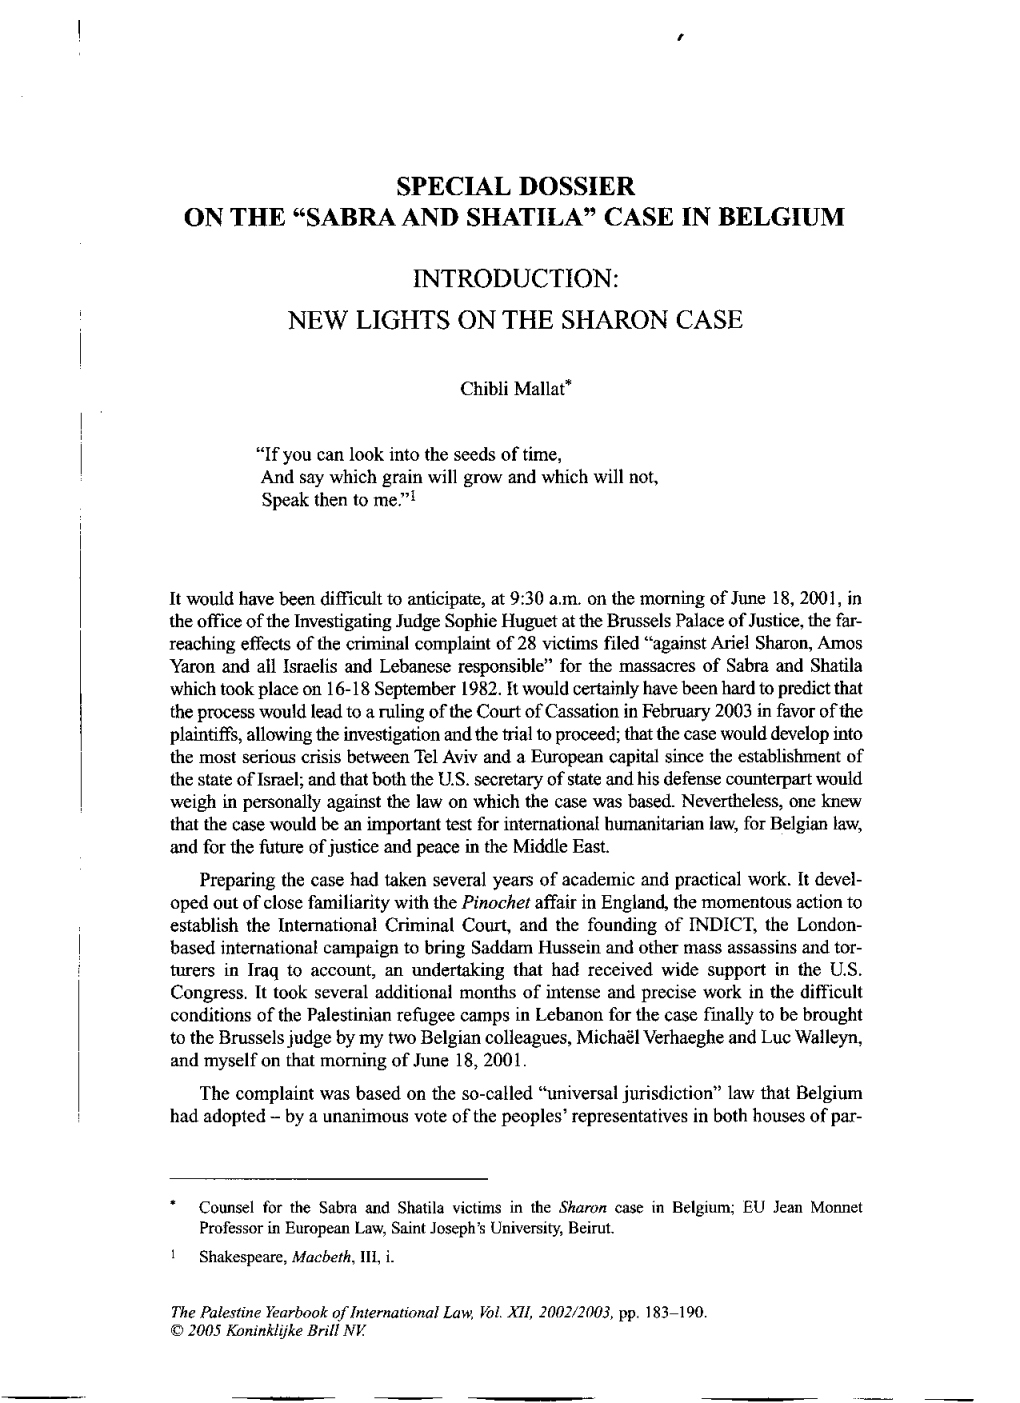 Special Dossier on the "Sabra and Shatila" Case in Belgium